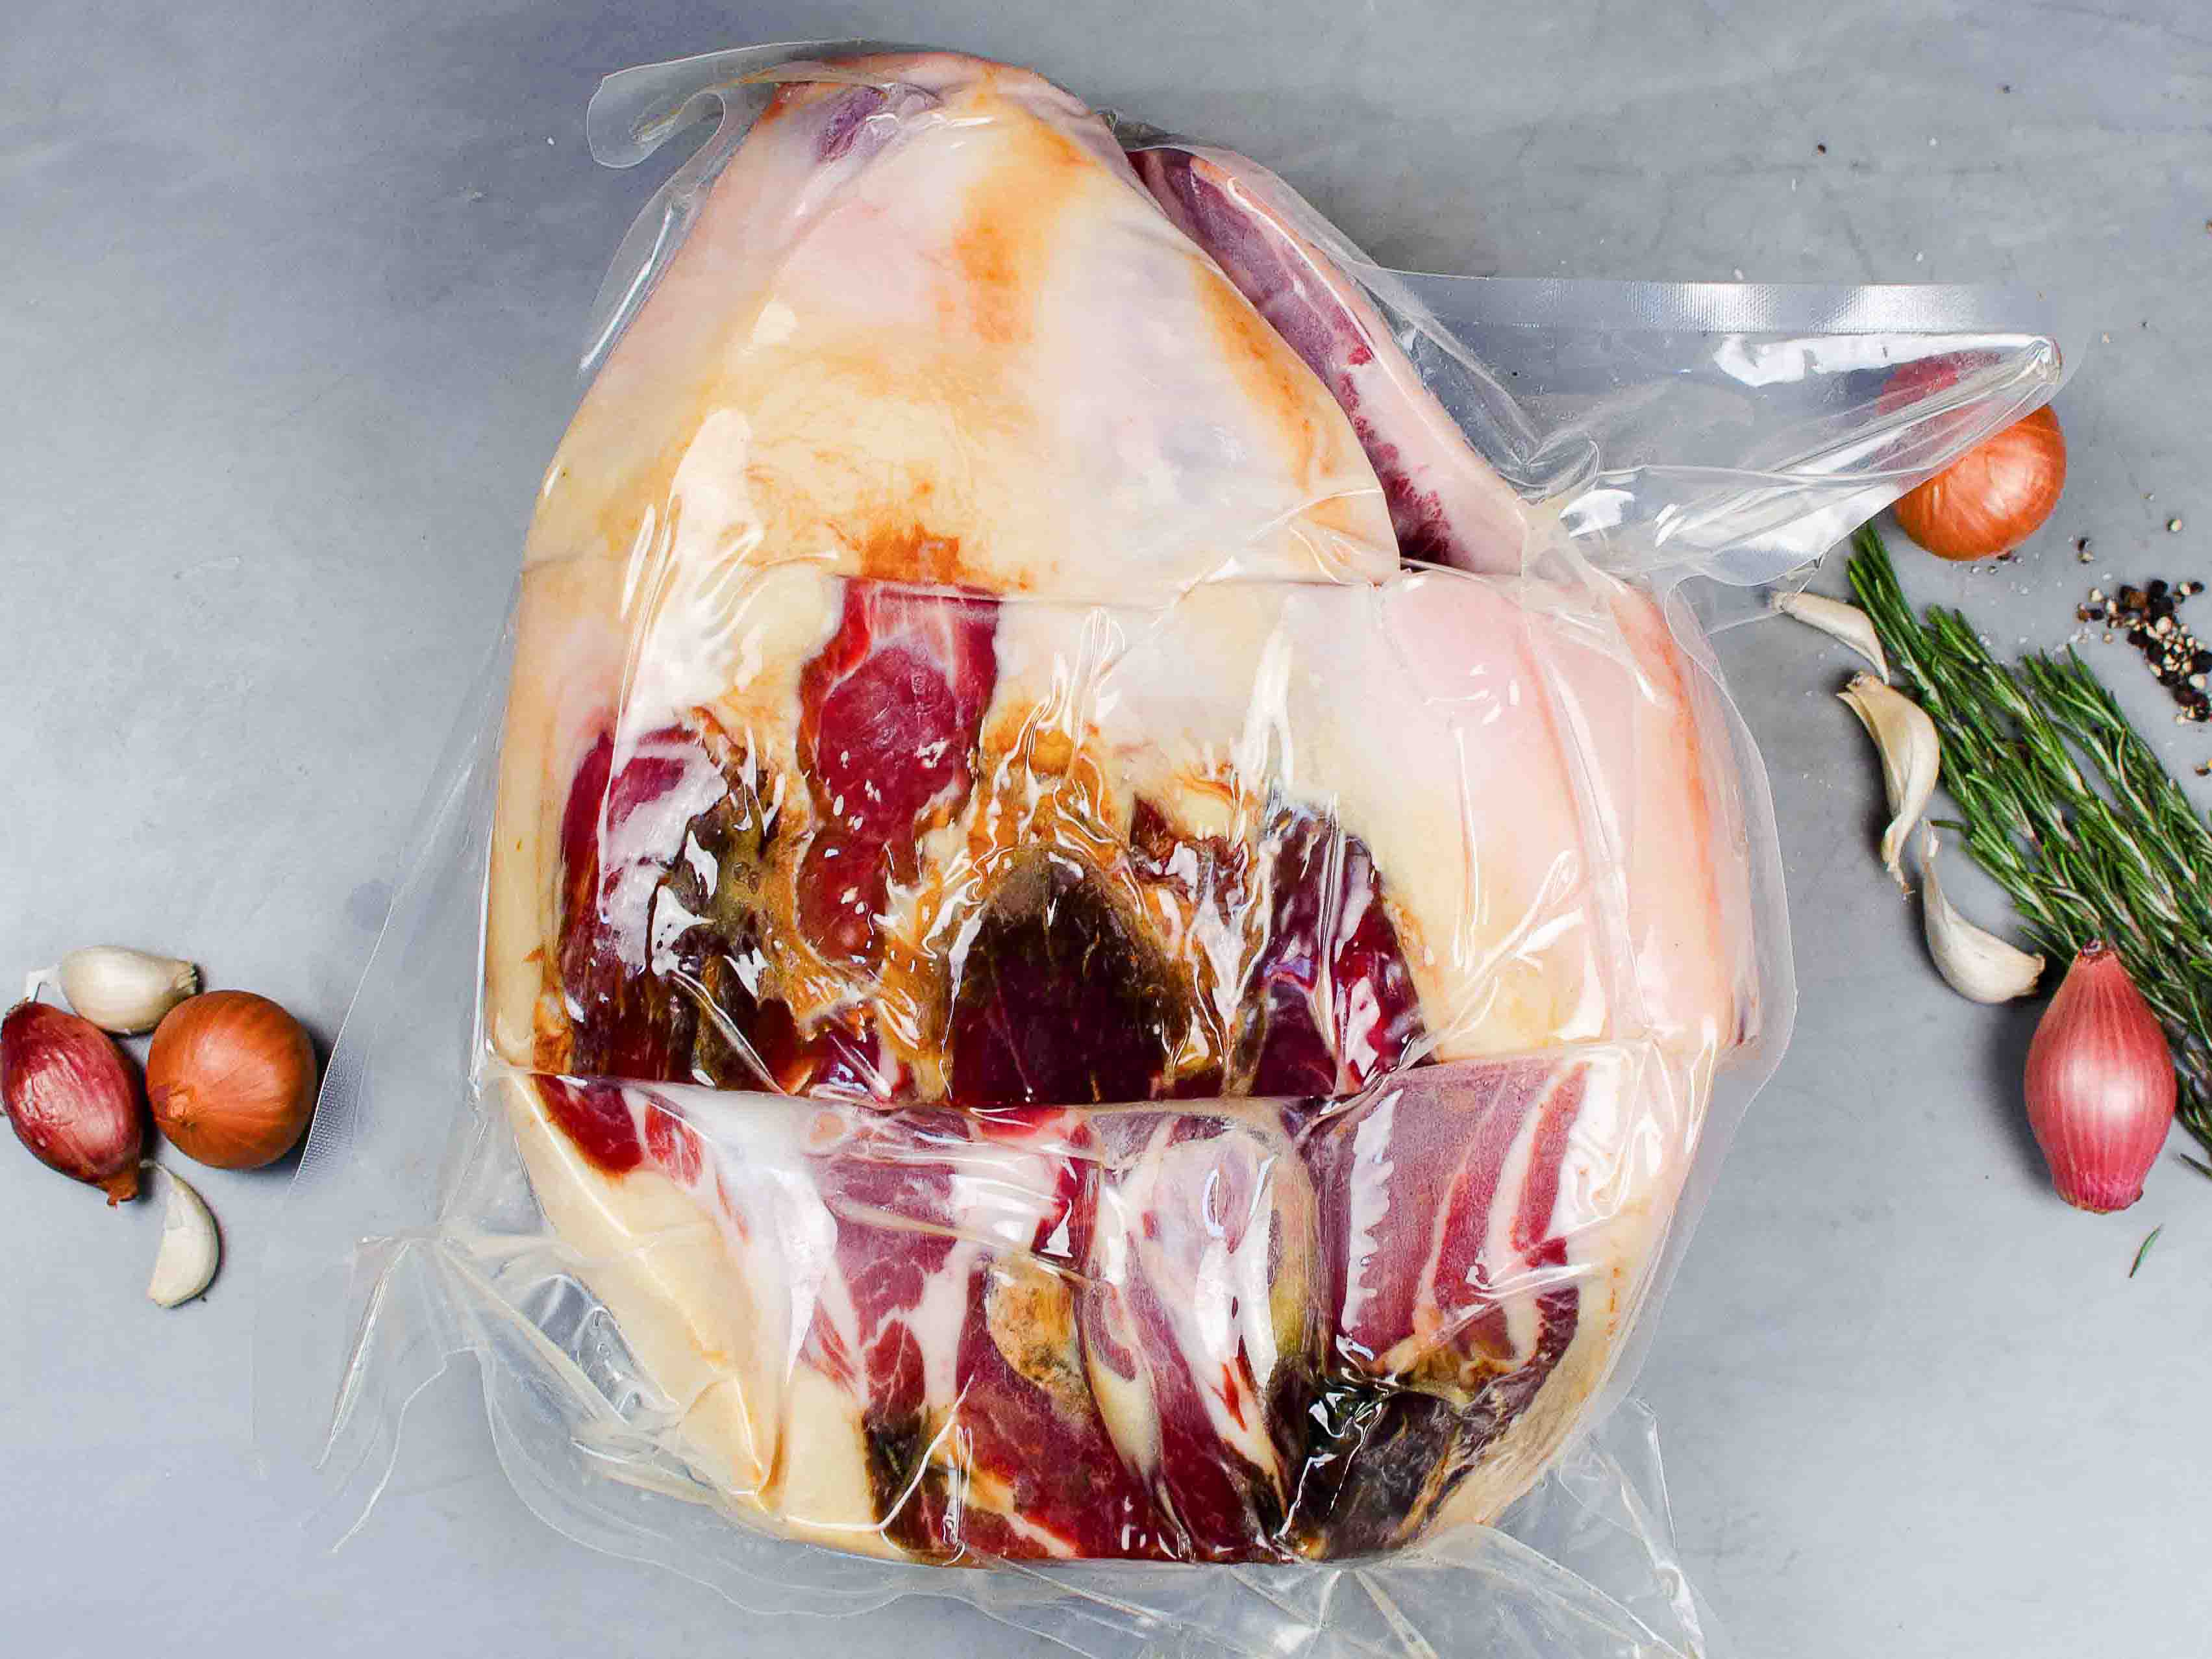 BROADBENT'S HERITAGE DRY CURED COUNTRY HAM — NOW 30% OFF